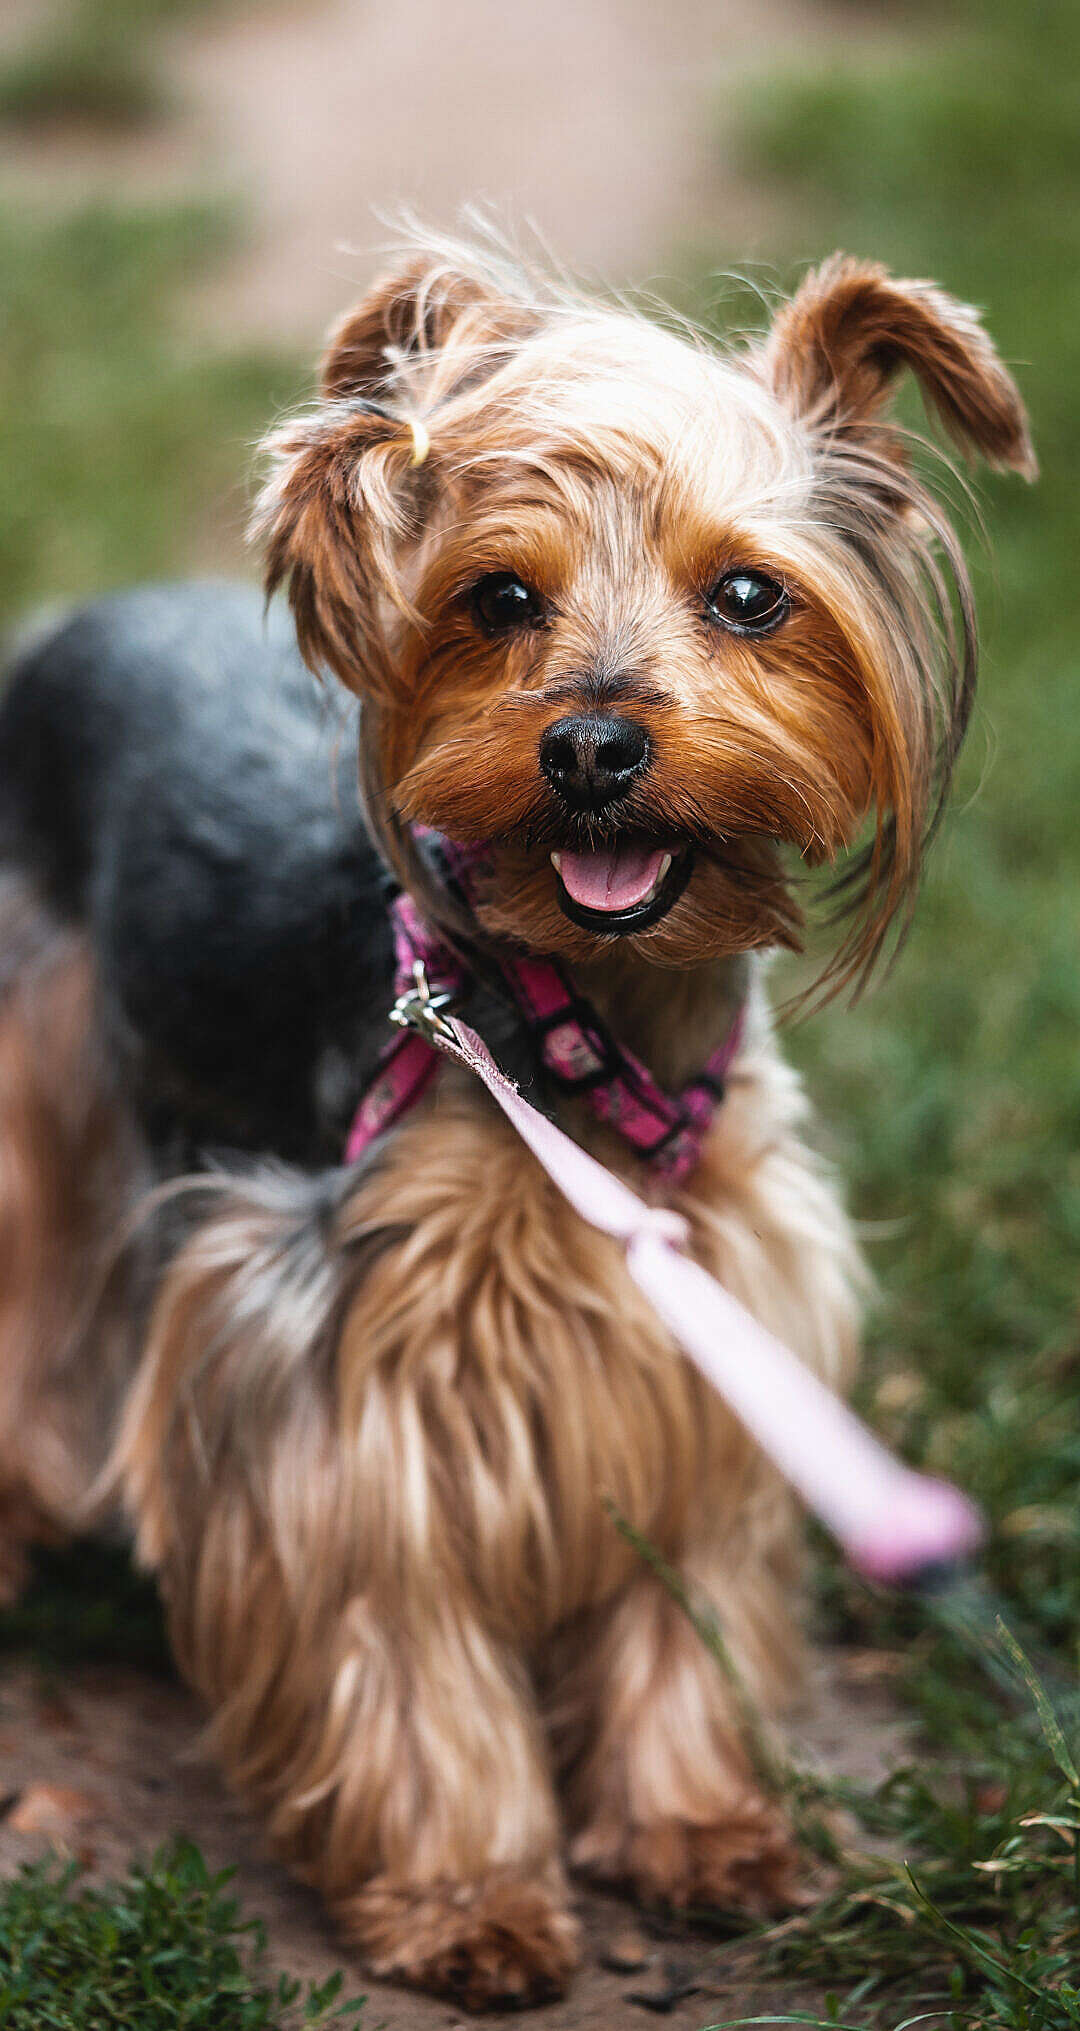 Our Yorkshire Terrier Jessie on a Leash